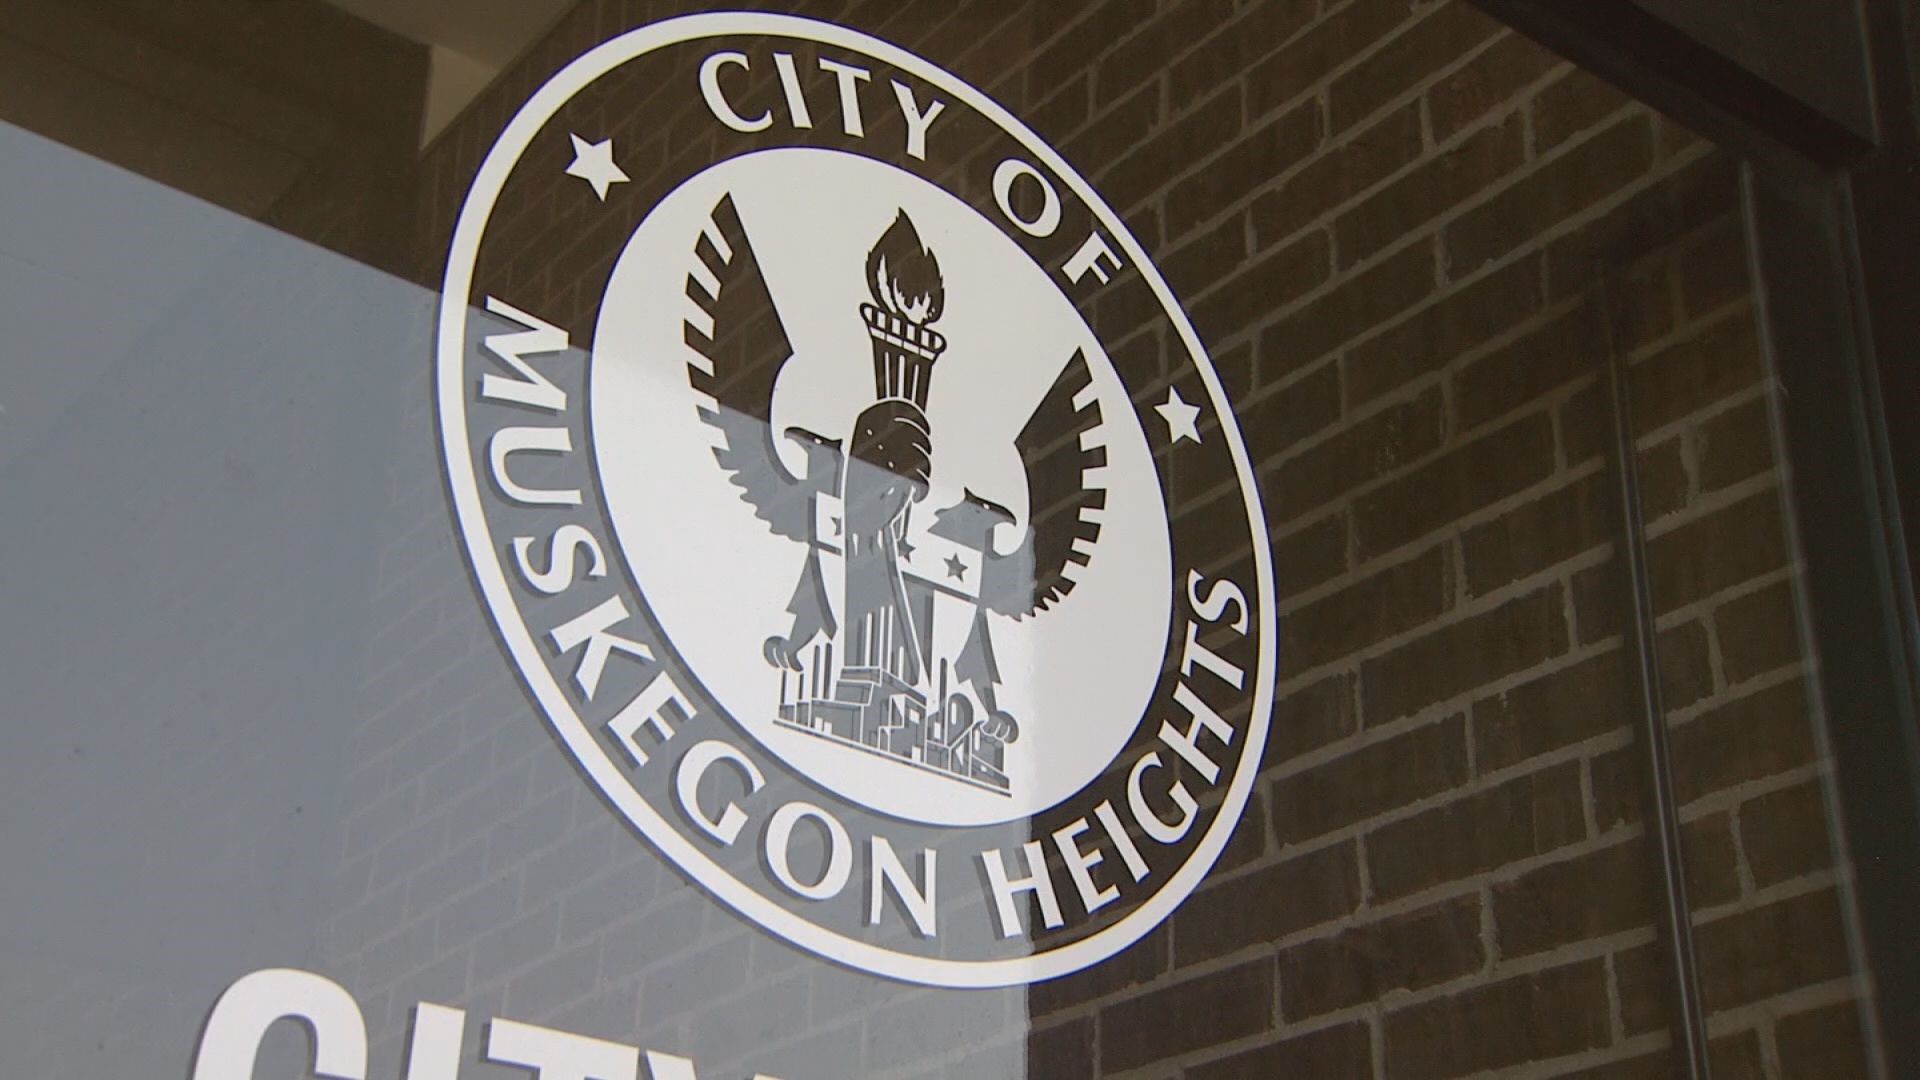 The City Manager believes an article published earlier this week may have contained misinformation, leading to confusion for many residents.